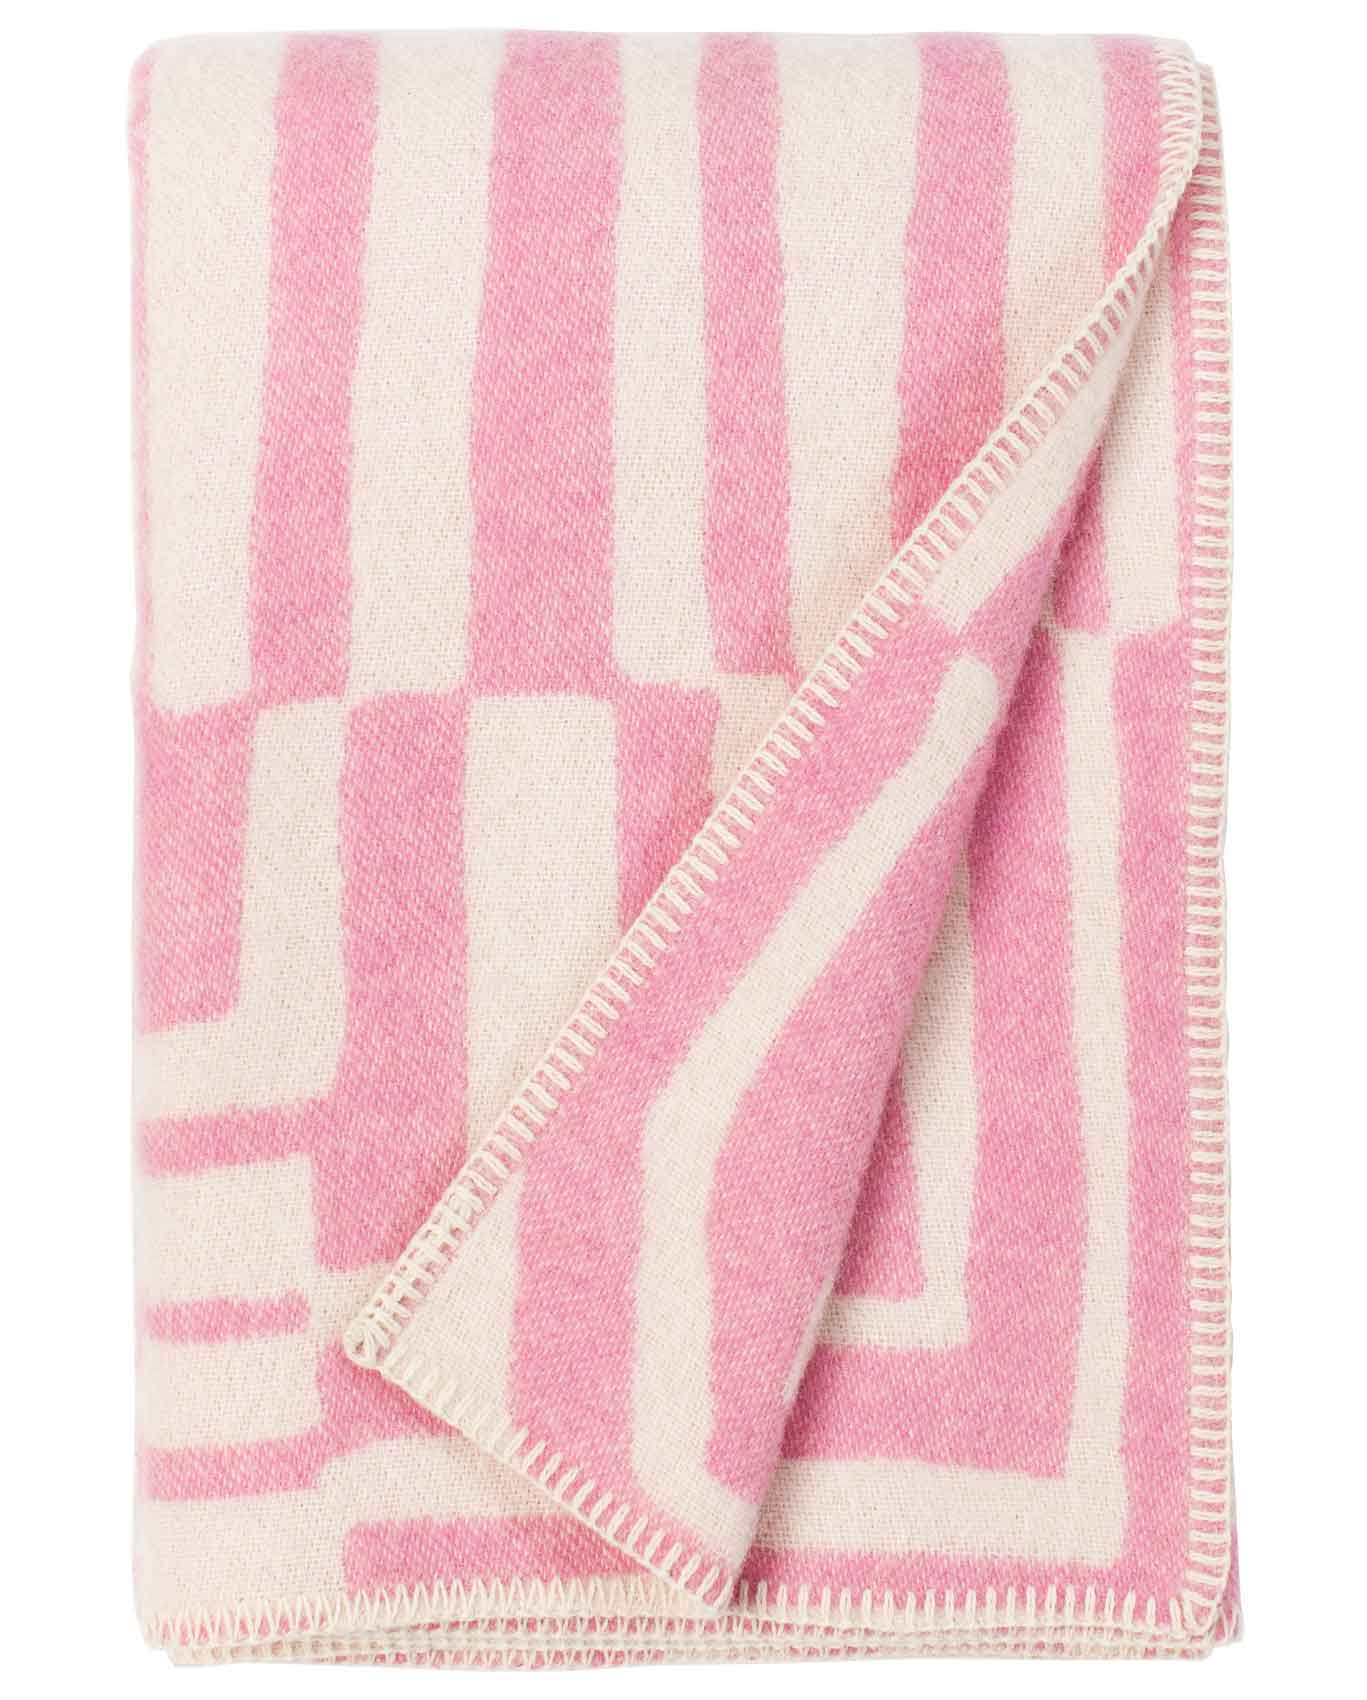 "Obscure Chess" Pure Wool Blanket by Jonathan Ryan Storm. Pink/White